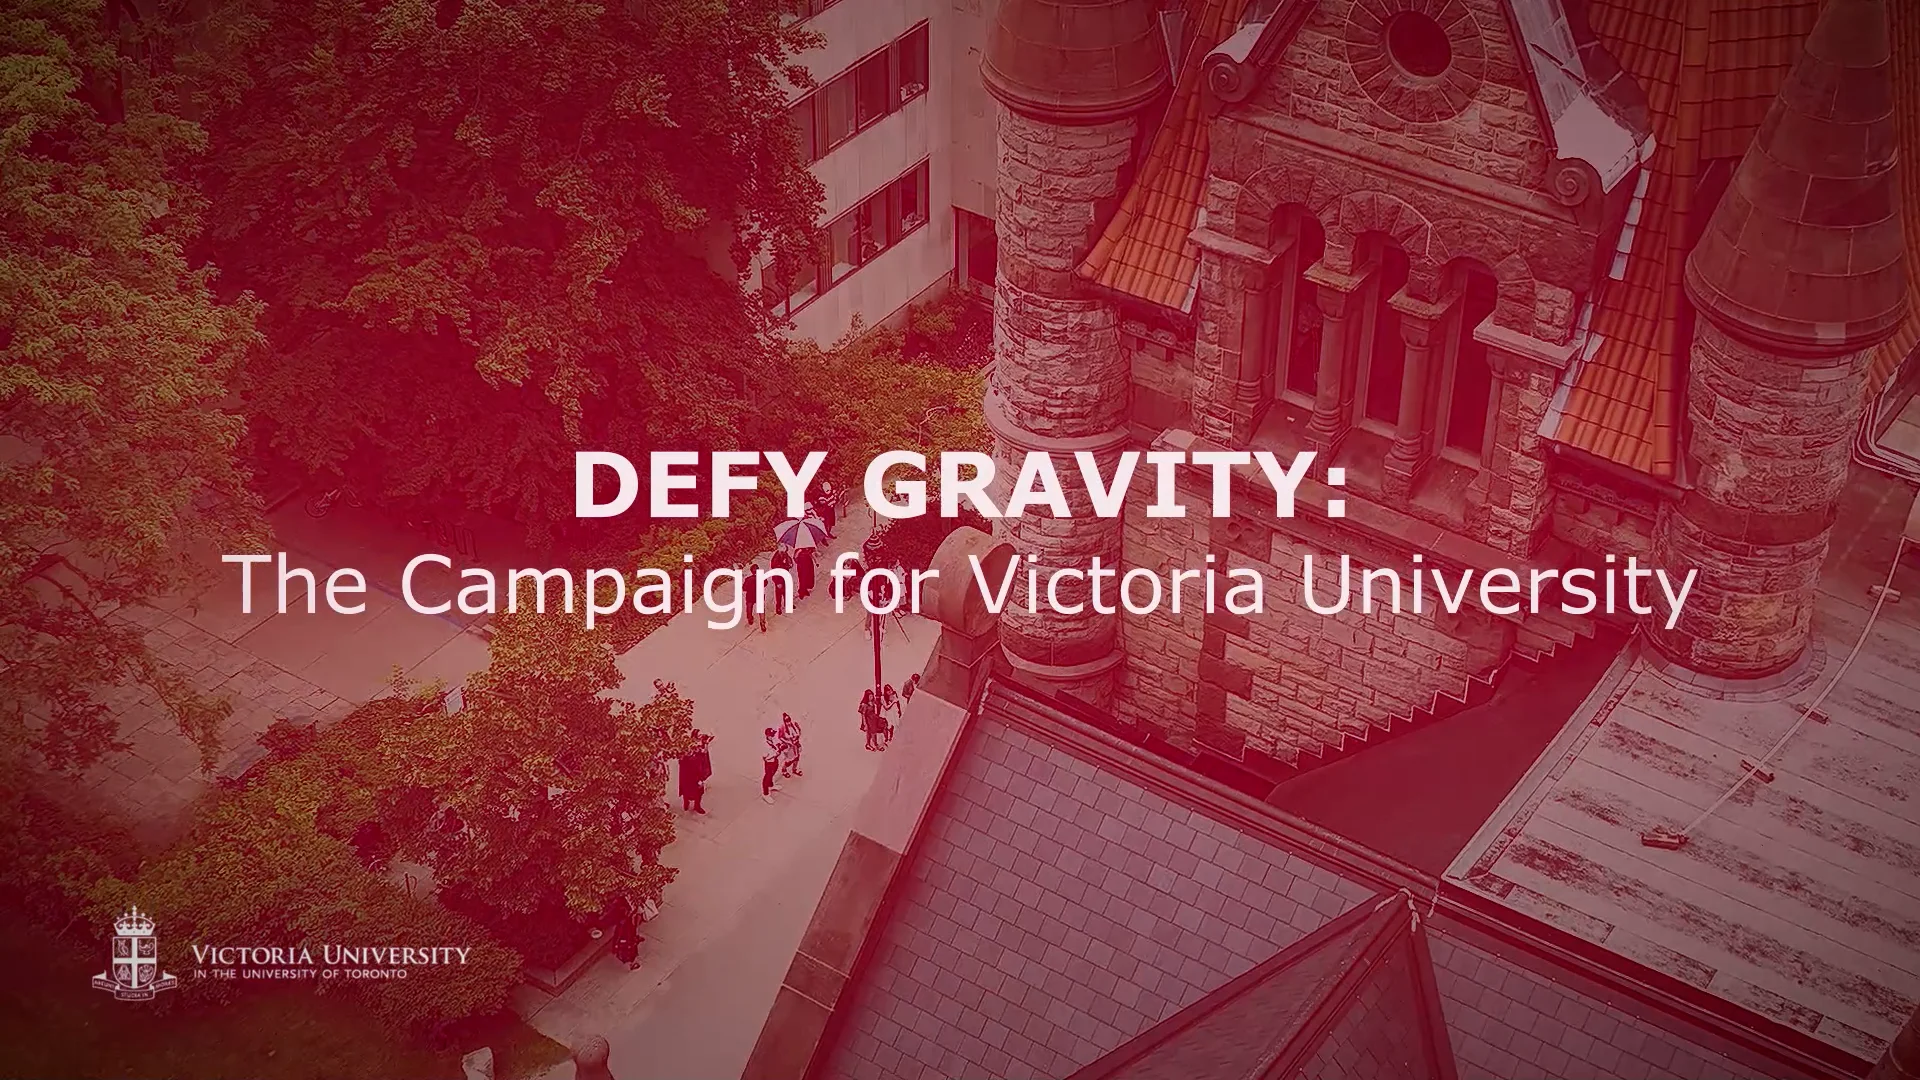 Defy Gravity: The Campaign for the University of Toronto